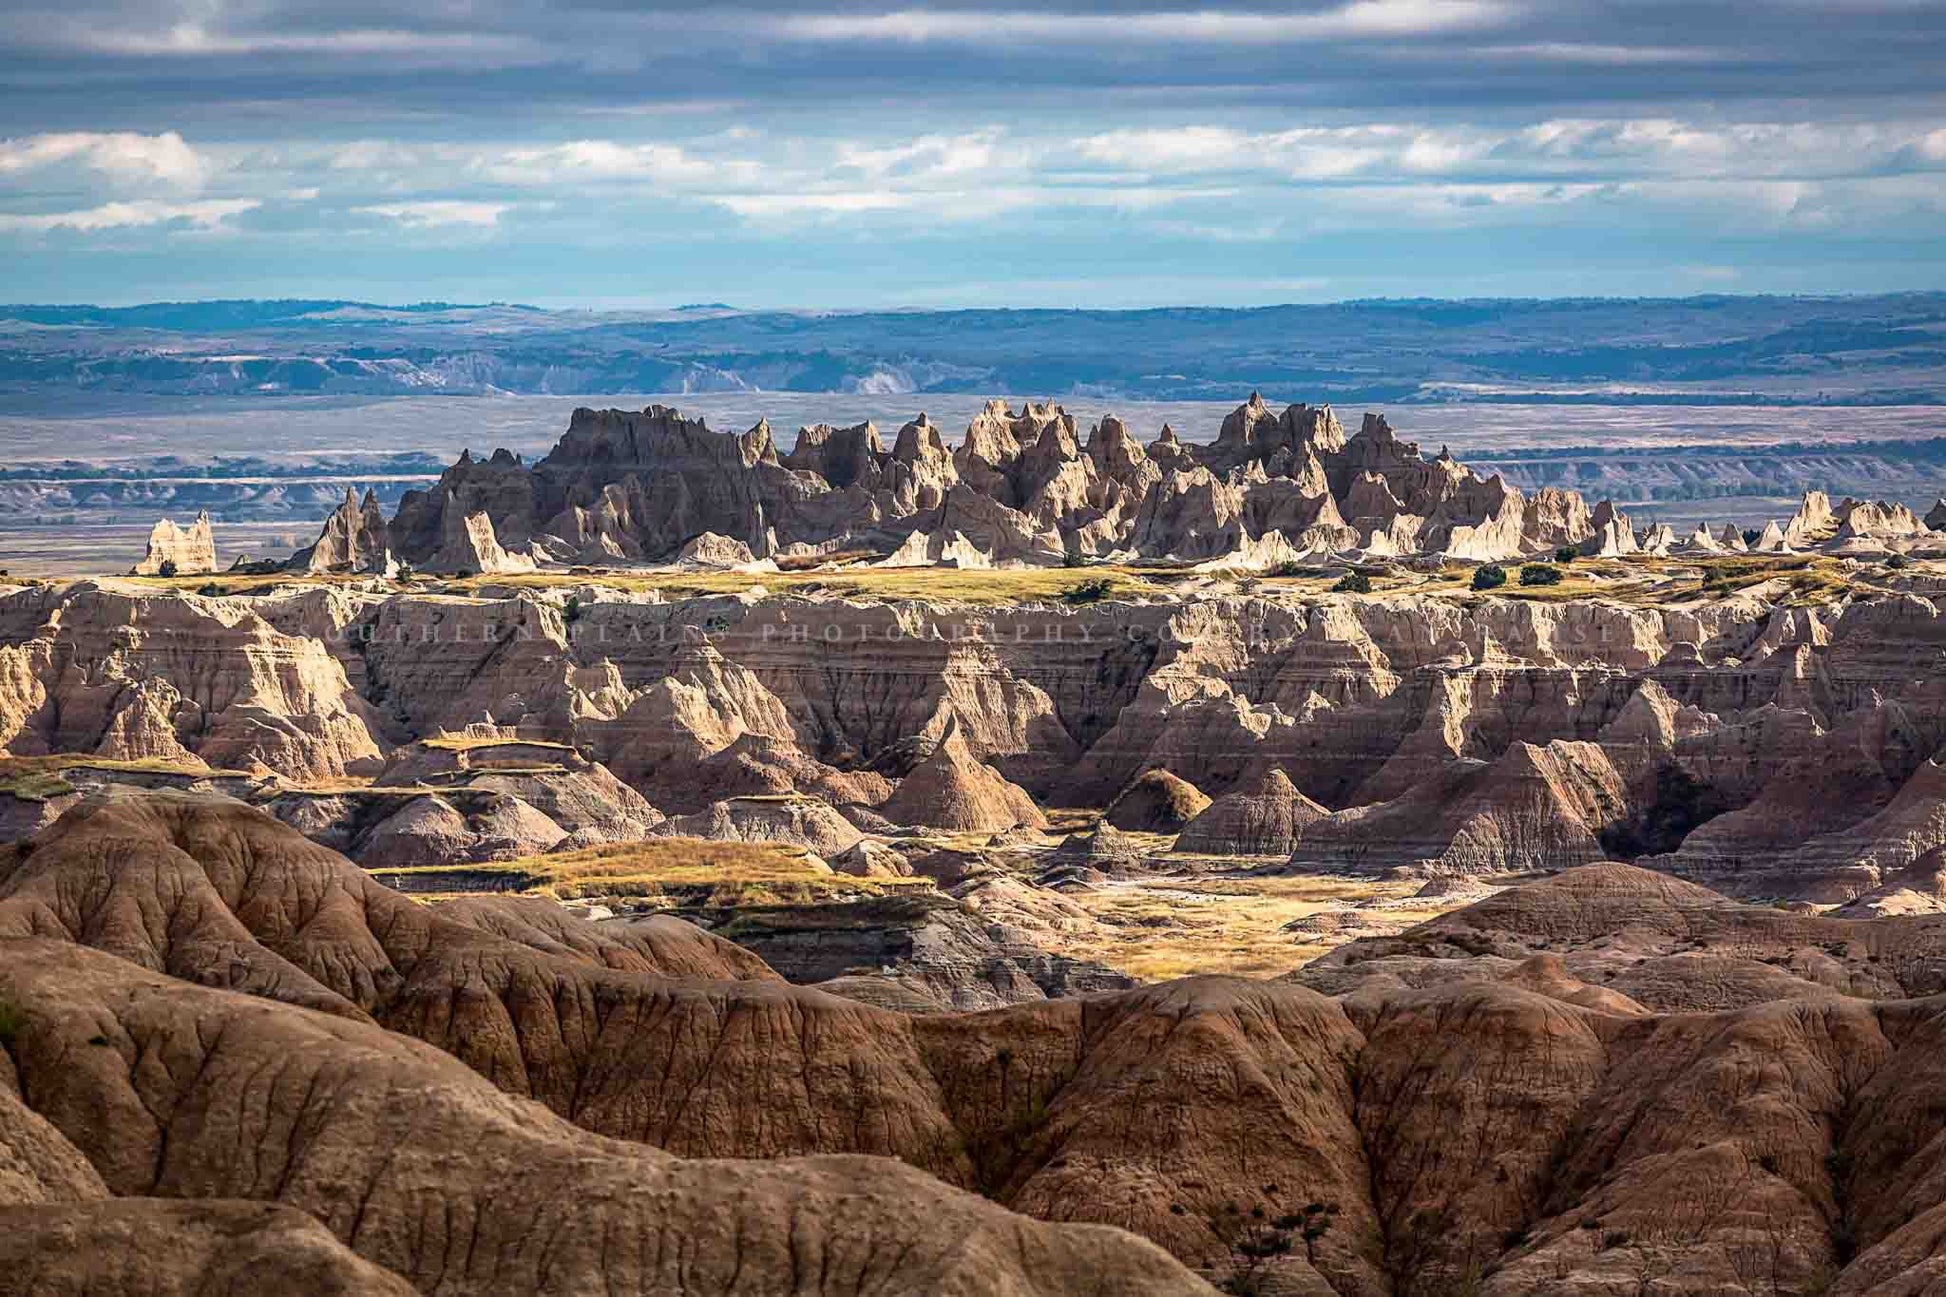 Landscape photography print of spires rising above the plains in Badlands National Park, South Dakota by Sean Ramsey of Southern Plains Photography.